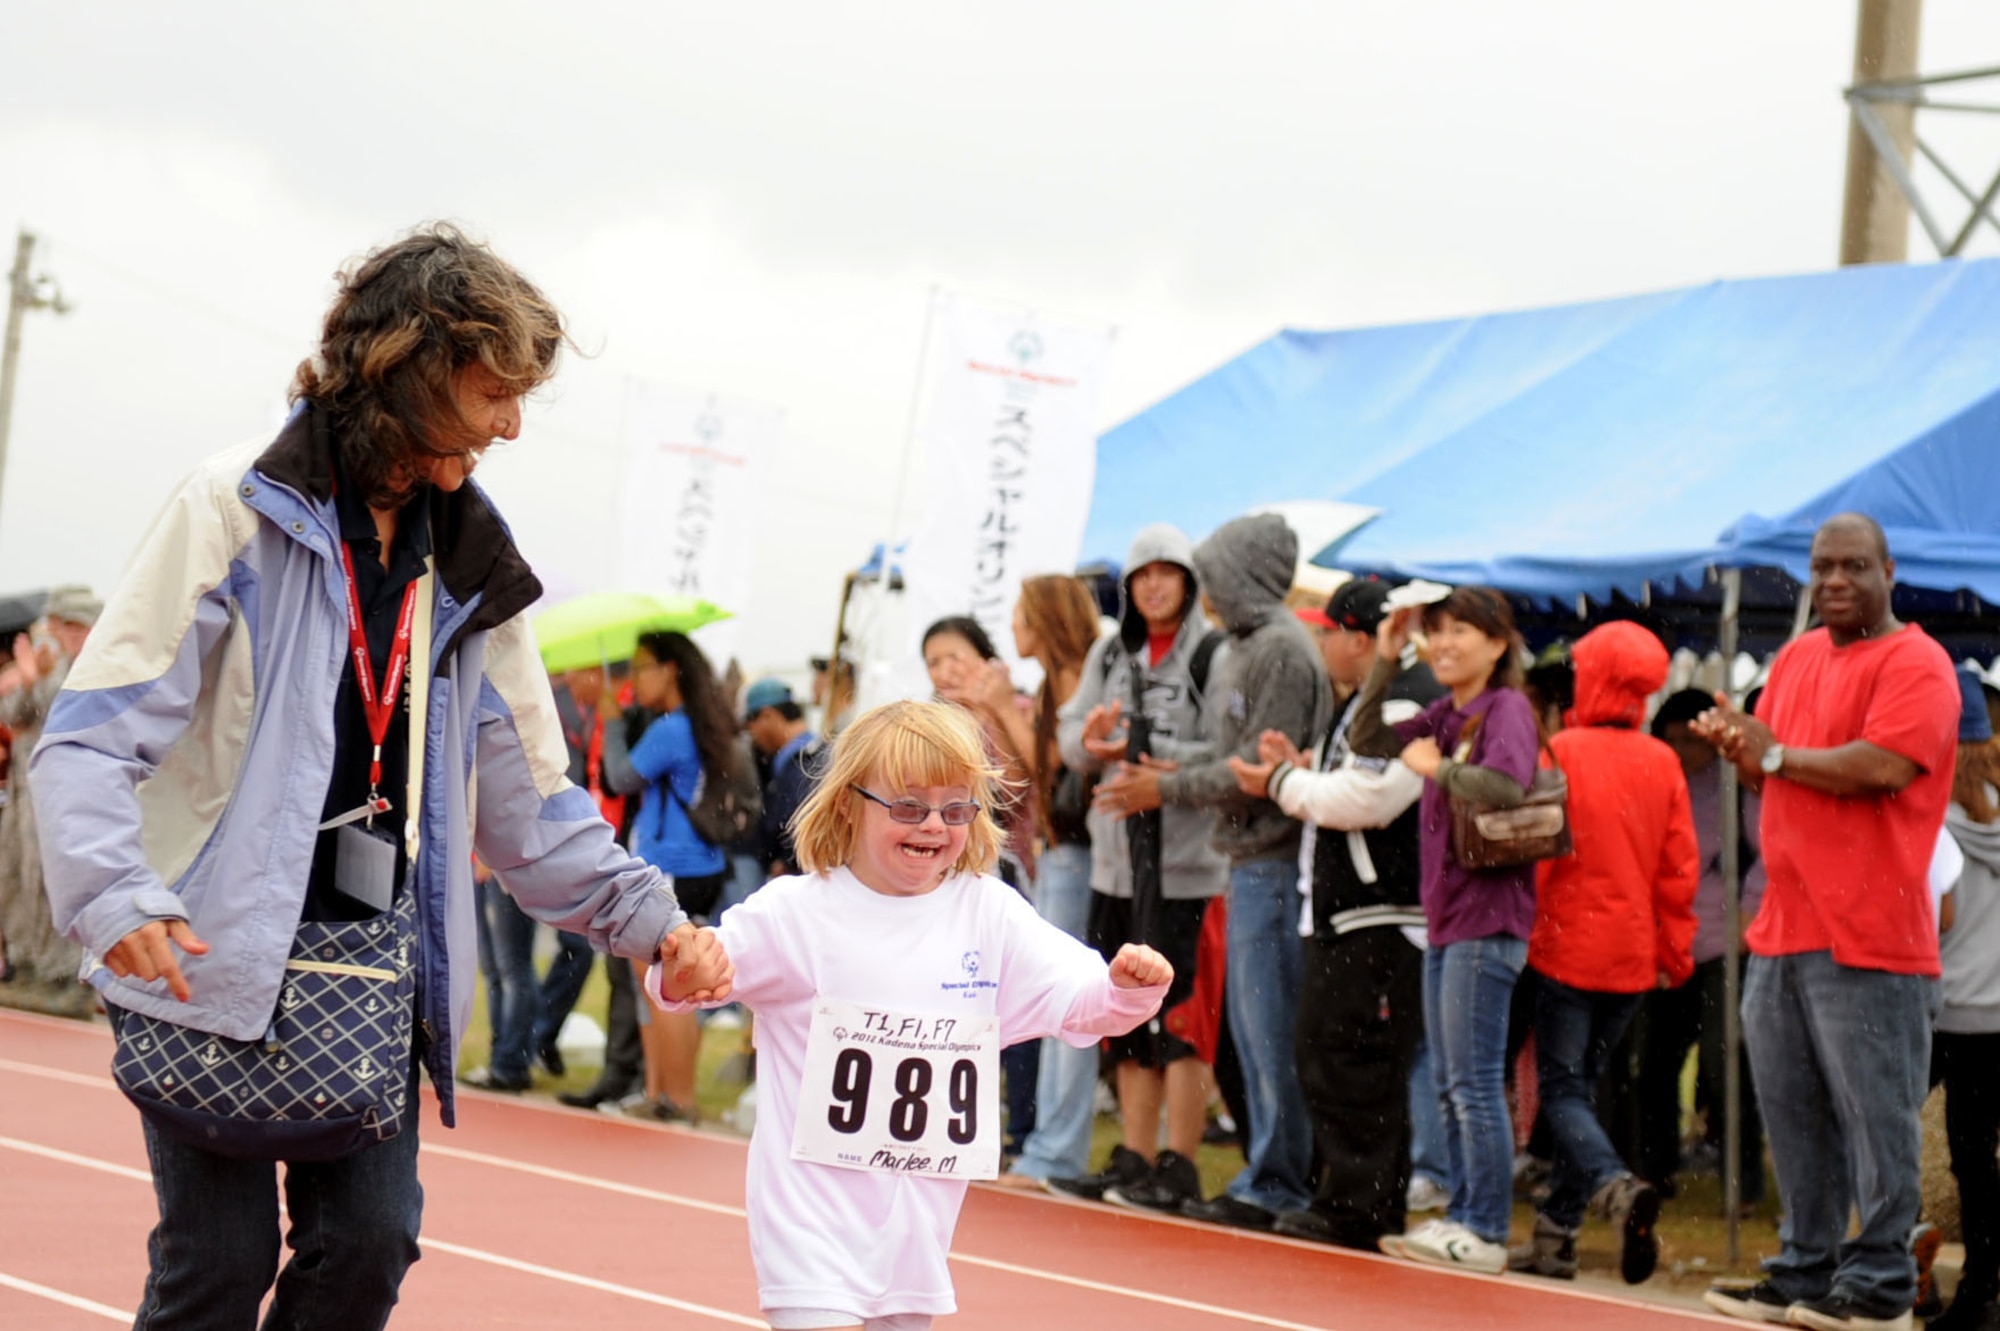 Marlee McDaniel, daughter of U.S. Air Force Col. Brain McDaniel, 18th Wing vice commander, runs the 30 meter dash for her fist event at the Kadena Special Olympics on Kadena Air Base, Japan, Nov. 17, 2012. Marlee is participating in KSO for the first time this year and also participated in the 30 meter dash, and softball throw. (U.S. Air Force photo/Airman 1st Class Brooke P. Beers)